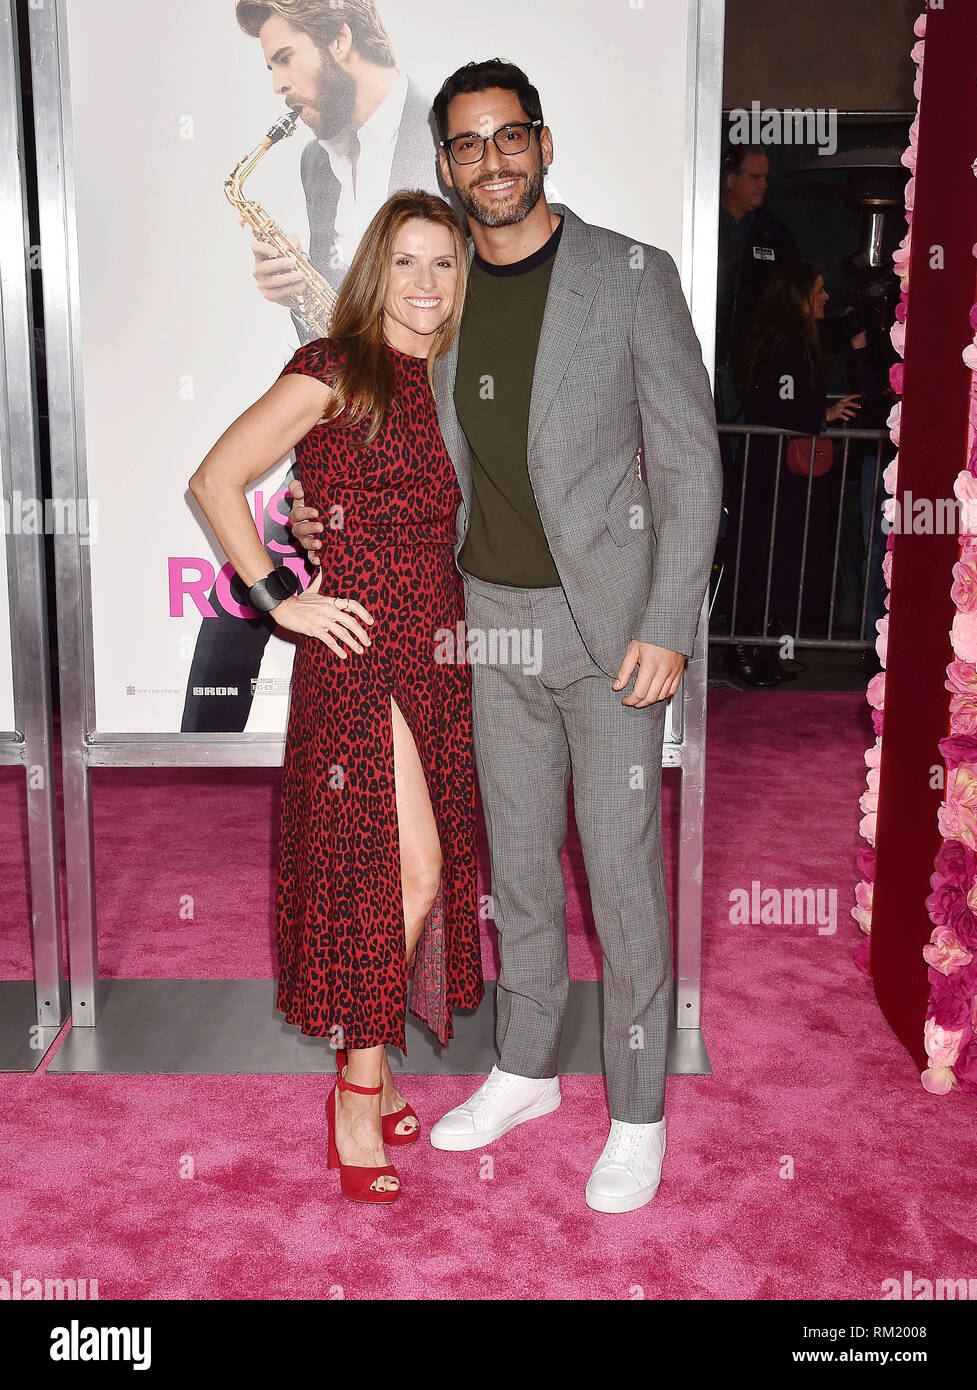 impressionisme Robust Tilkalde LOS ANGELES, CA - FEBRUARY 11: Gina Matthews (L) and Tom Ellis arrive at  the Premiere Of Warner Bros. Pictures' 'Isn't It Romantic' at The Theatre  at Stock Photo - Alamy